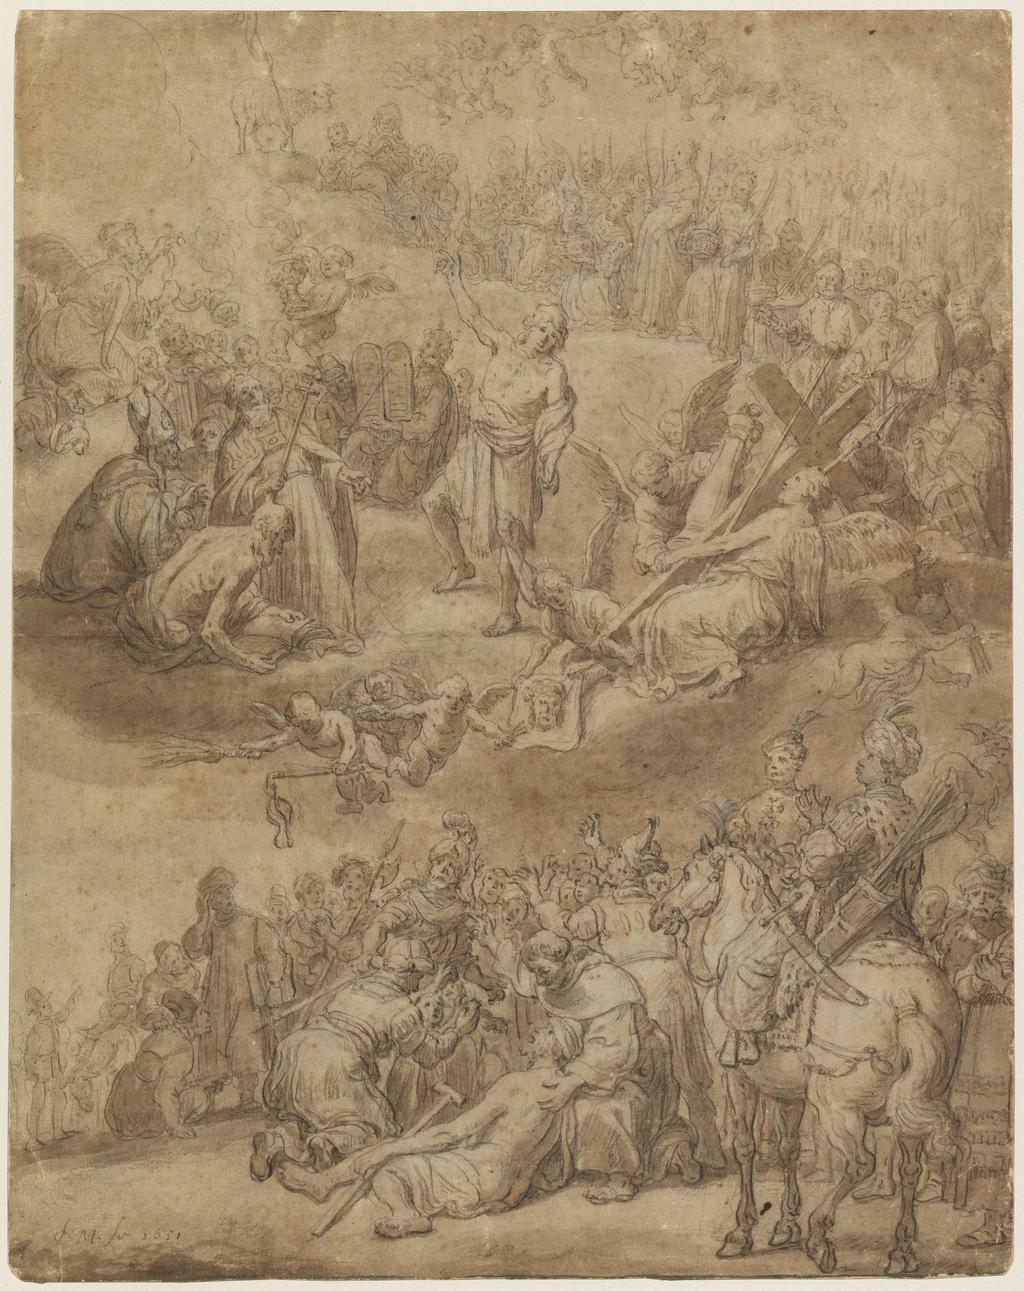 An image of The Worship of the Lamb. Moeyaert, Claes Cornelisz.(Dutch, 1592/3-1655). Pen and brown ink over black chalk, dark brown wash on slightly buff coloured paper, heightened with white in places, height 450 mm, width 356 mm, 1651.